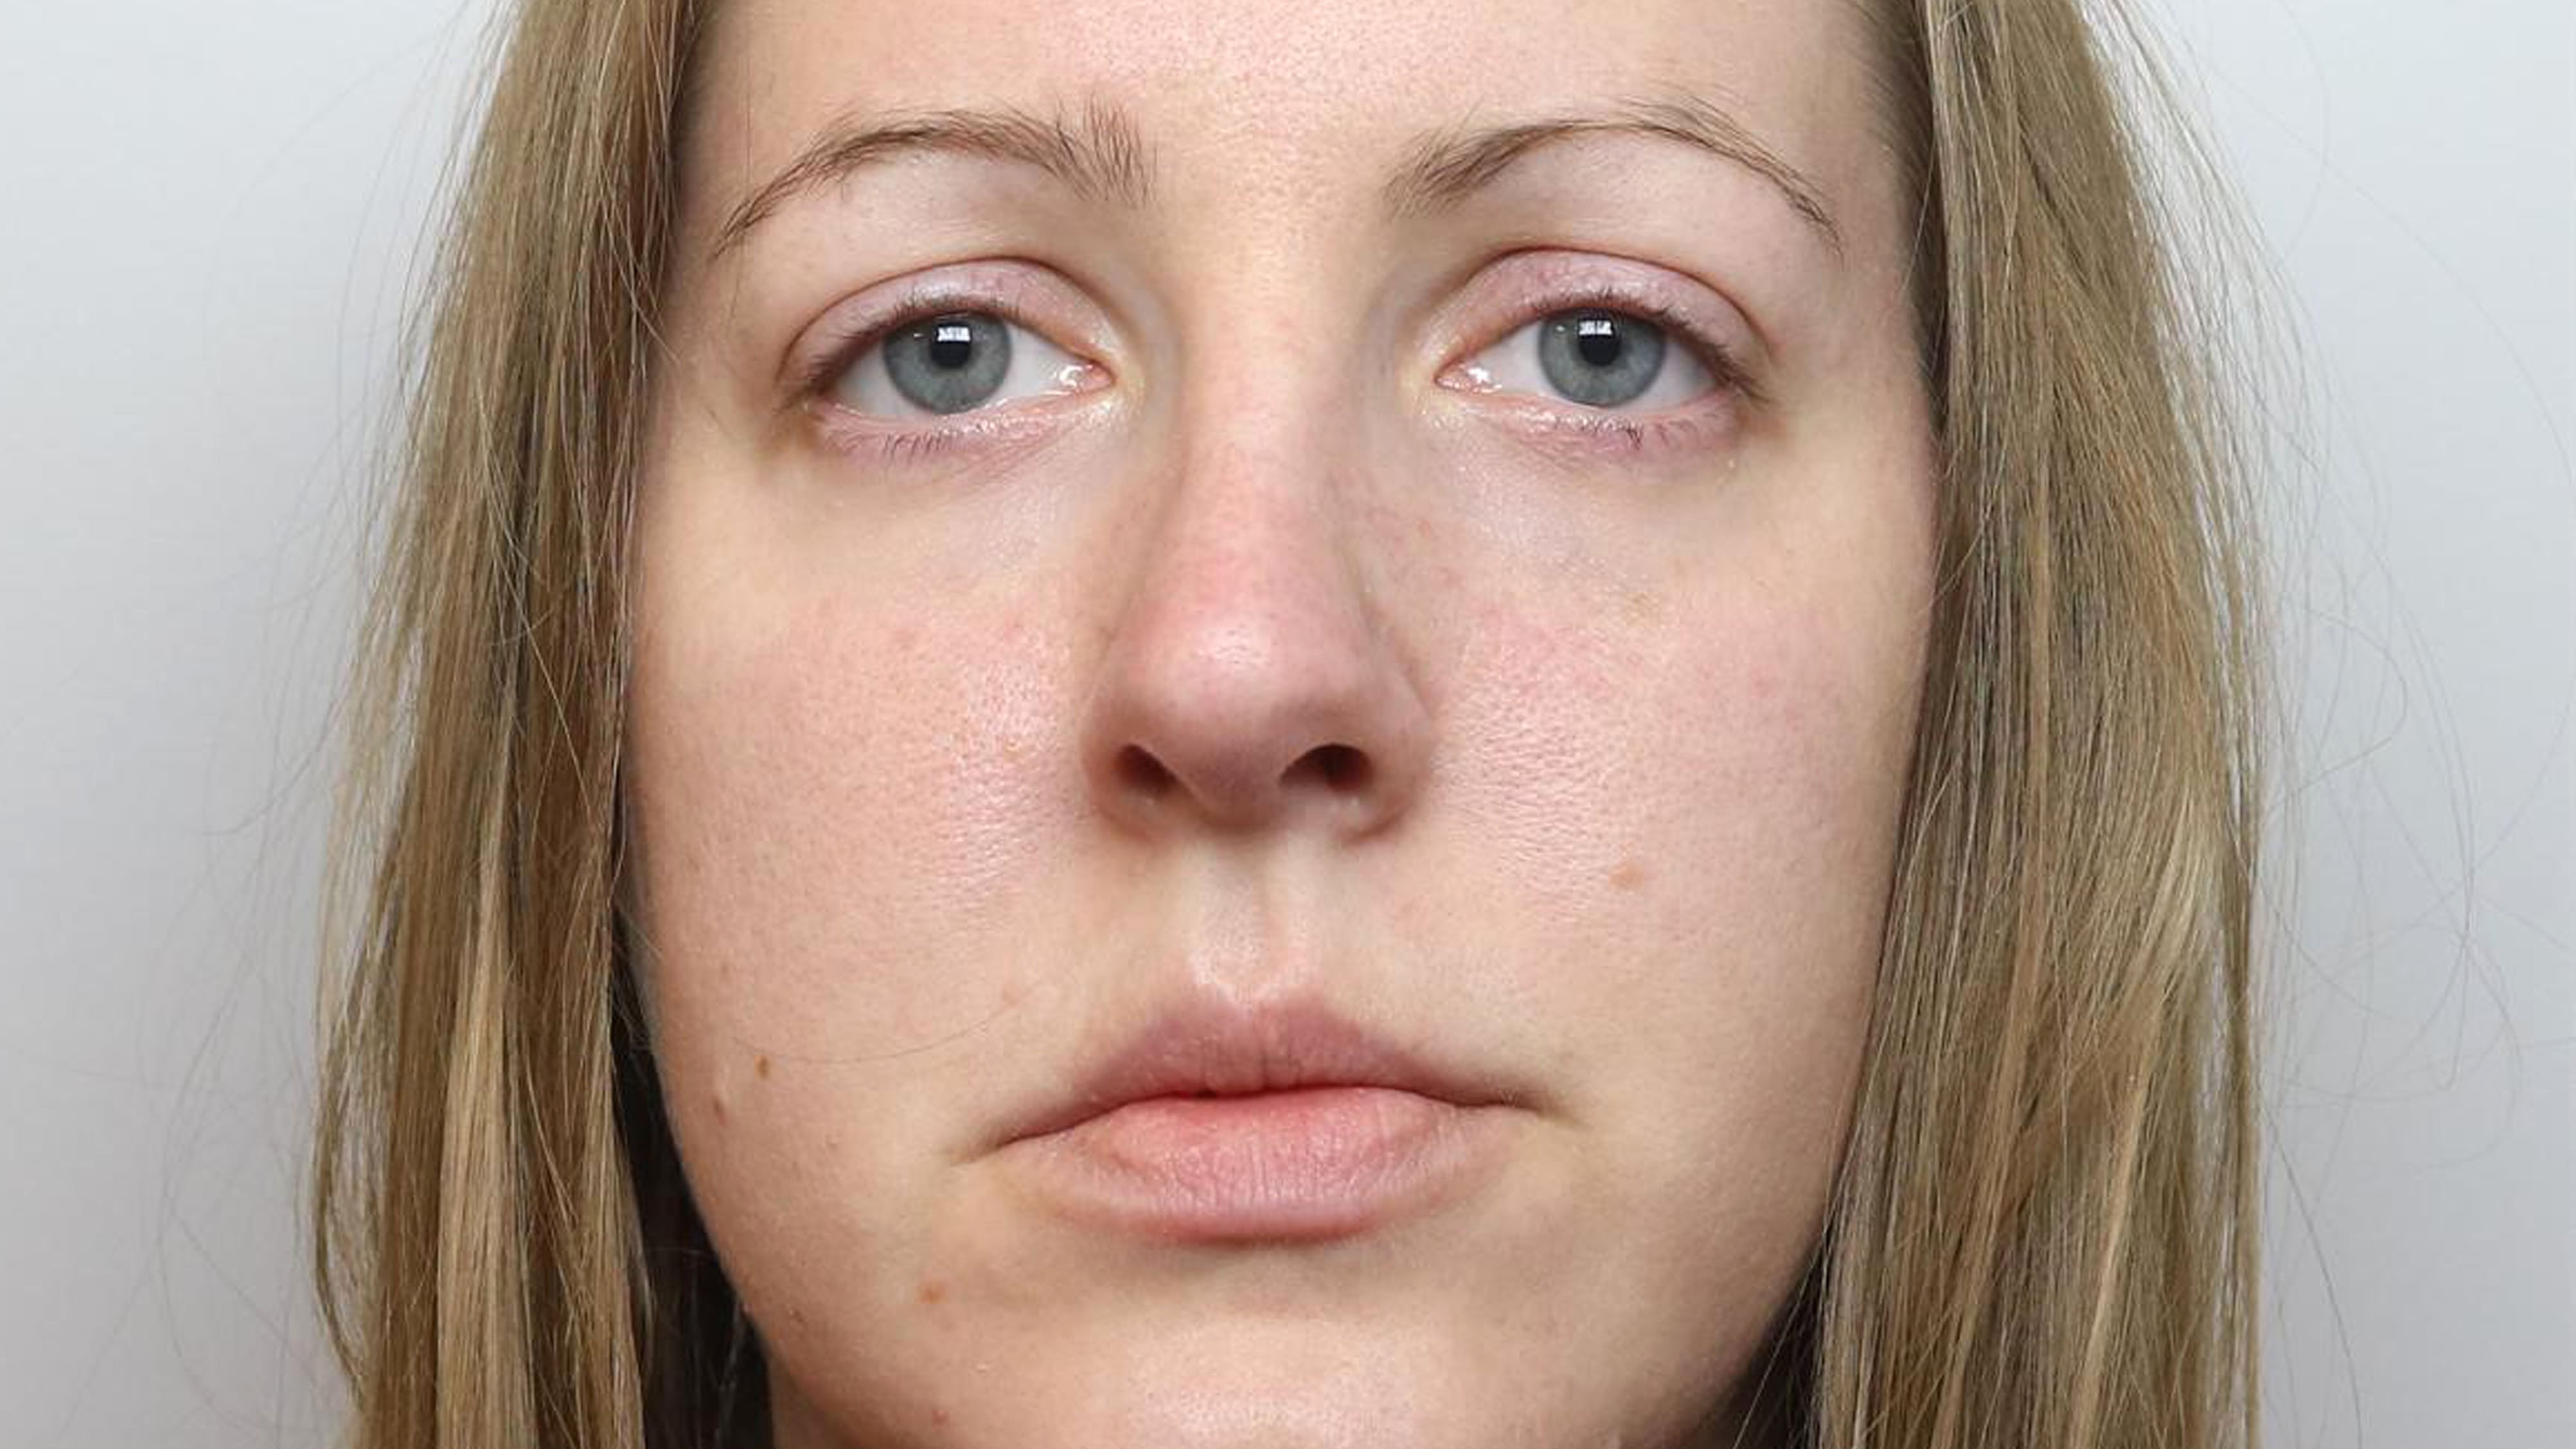 A jury has convicted convicted child killer Lucy Letby of the attempted murder of a baby girl